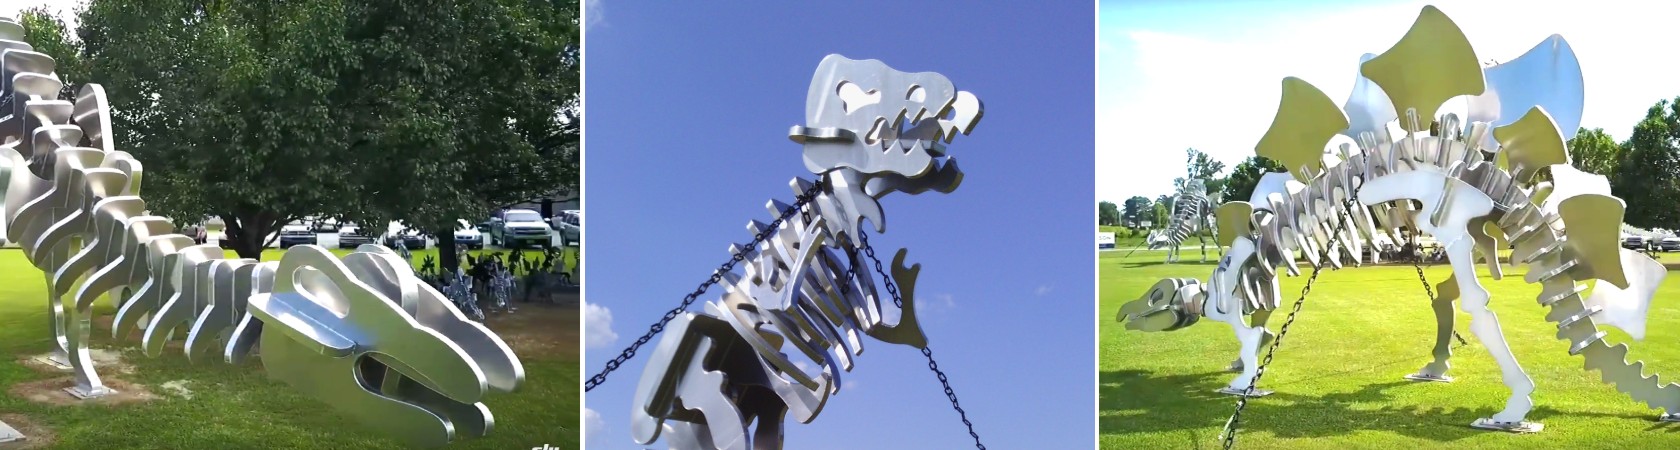 Stainless Steel Dinosaurs by Benton and Sons Fabrication